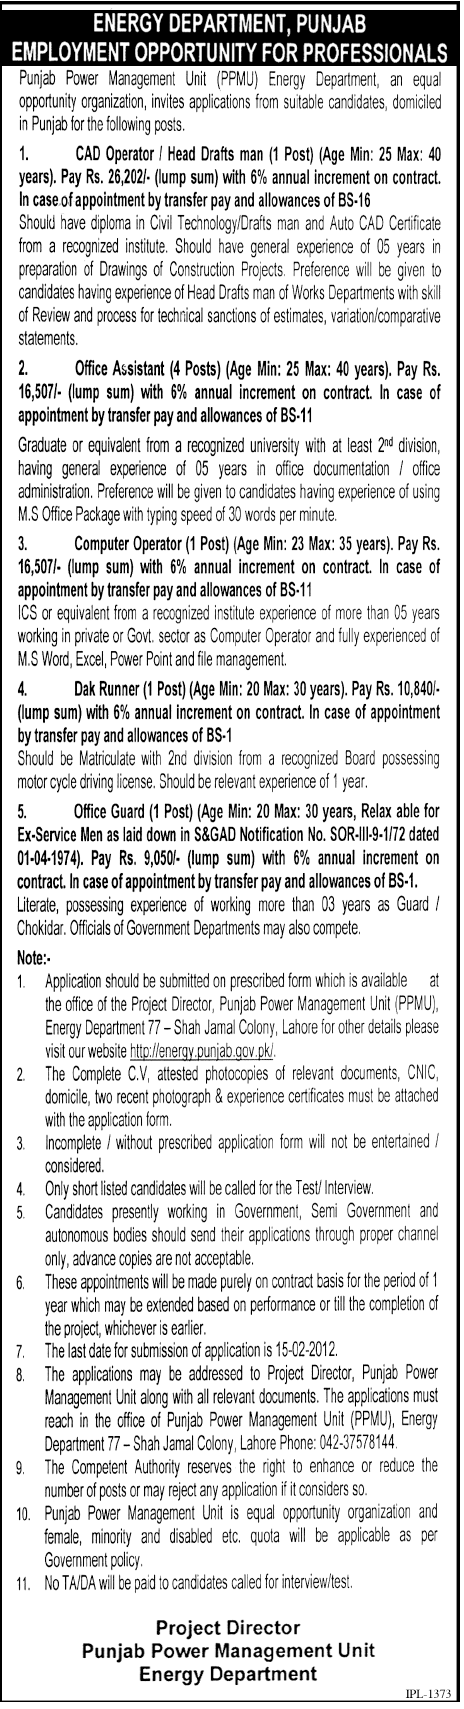 Energy Department, Punjab. Employment Opportunity For Professionals